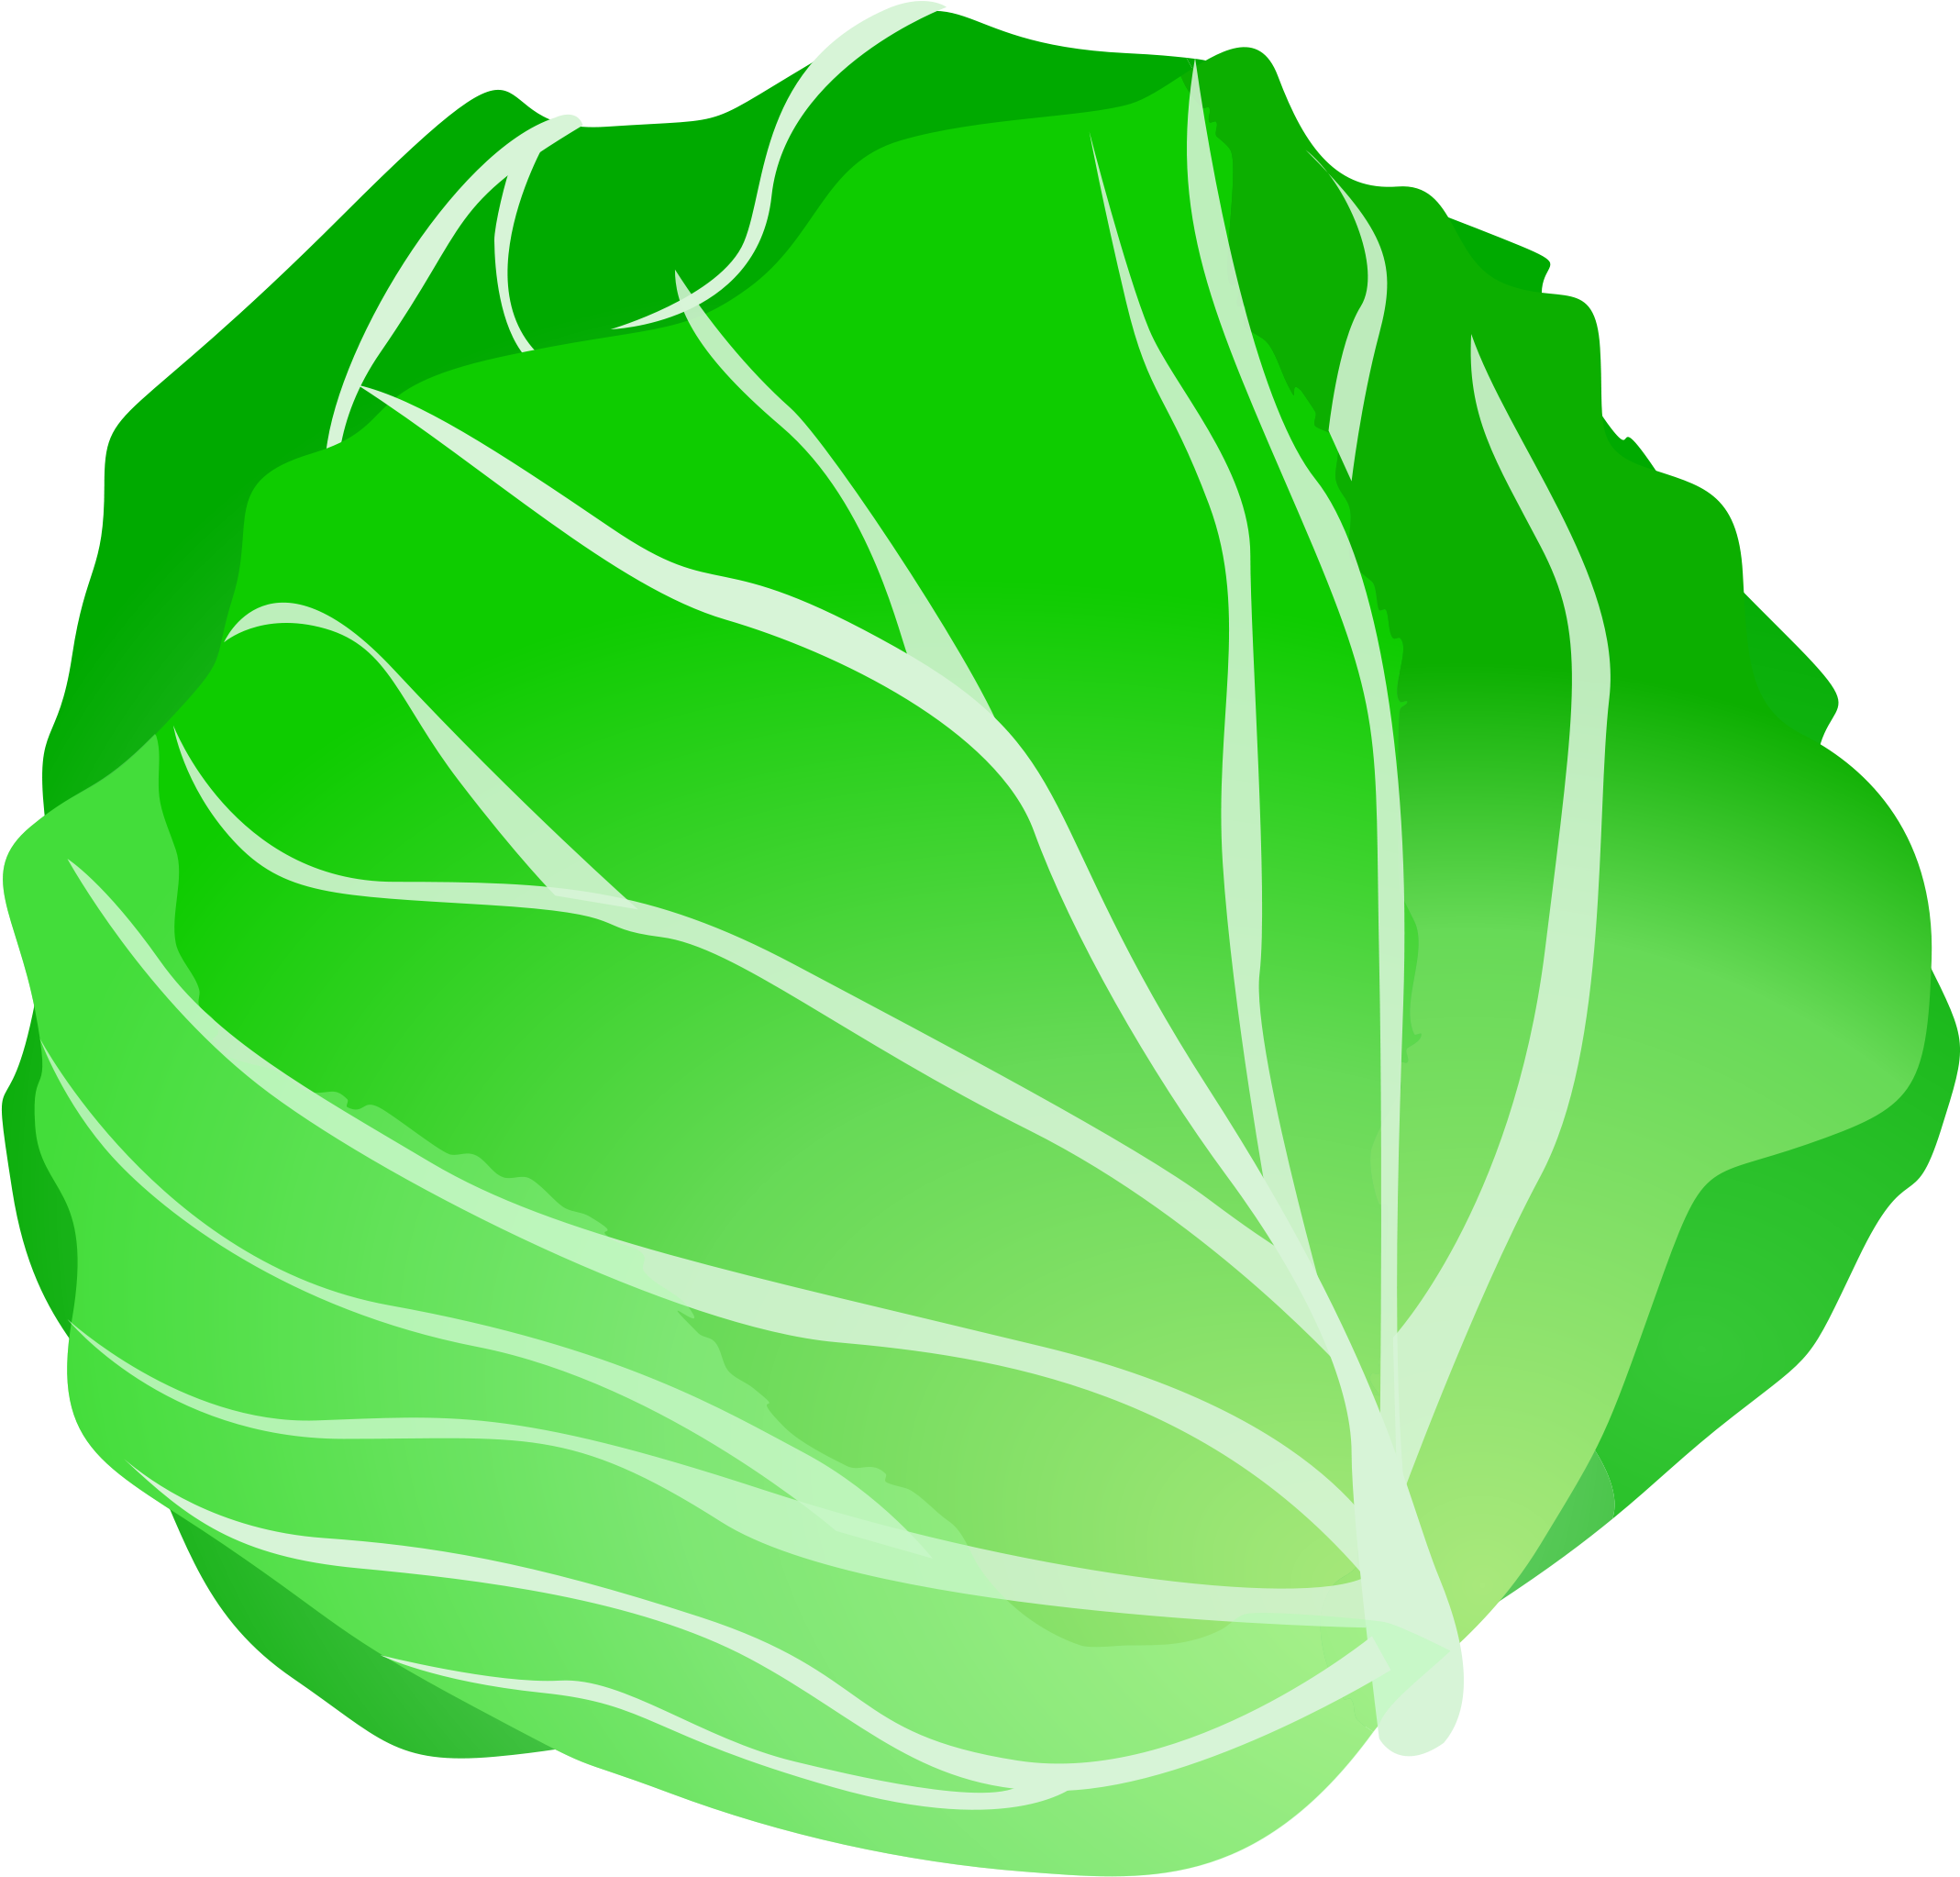 A Green Leaf With White Lines